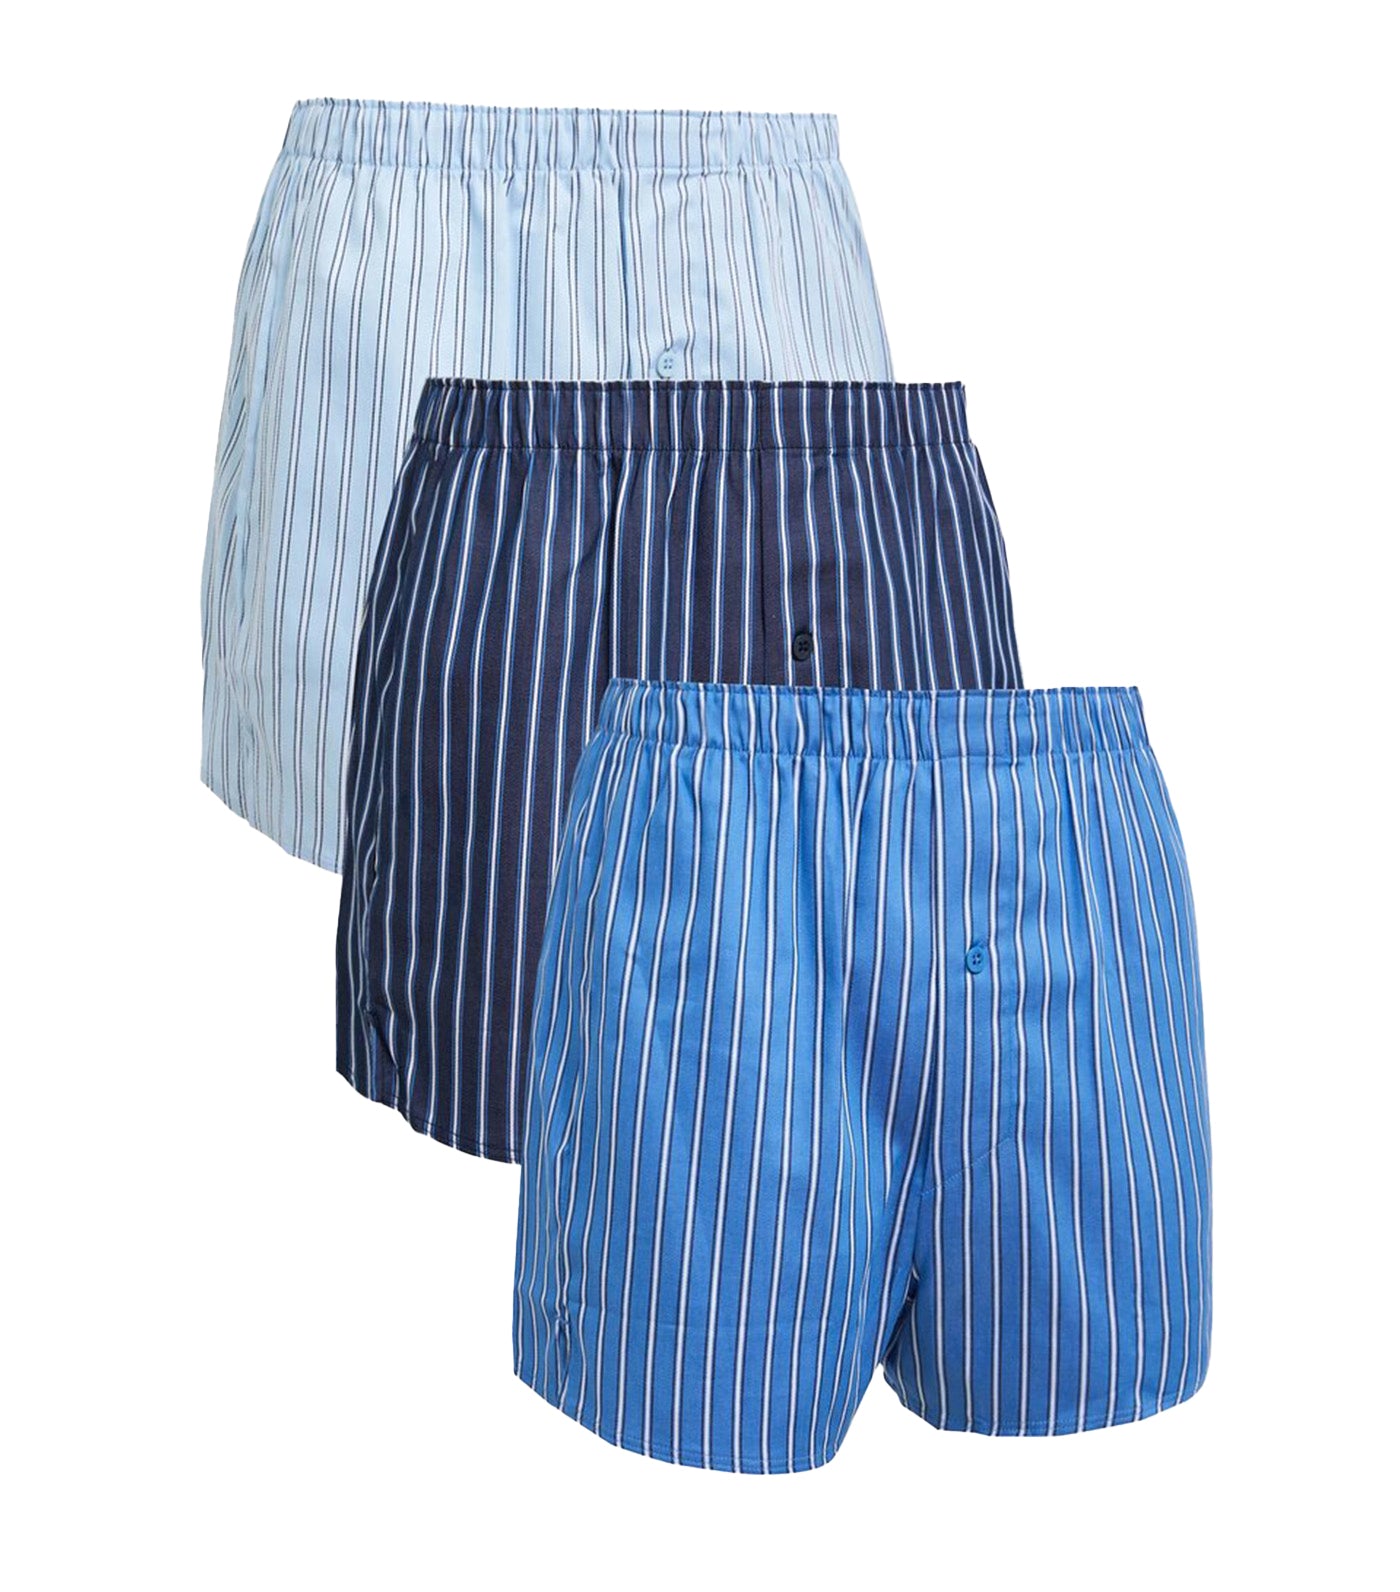 3 Pack Pure Cotton Striped Woven Boxers Ocean